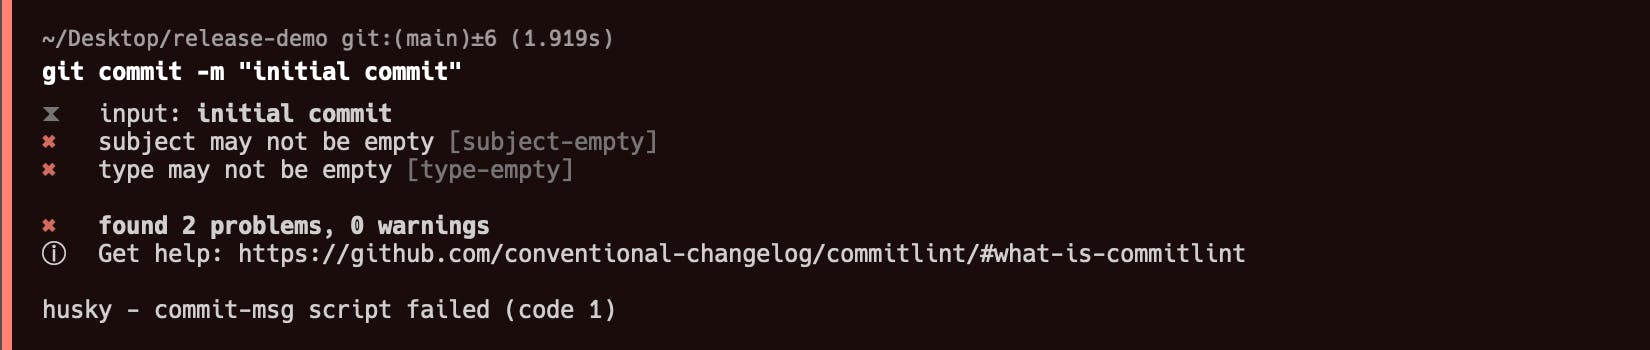 Screenshot showing the error message generated by Commitlint when a commit message does not adhere to the conventional commit format